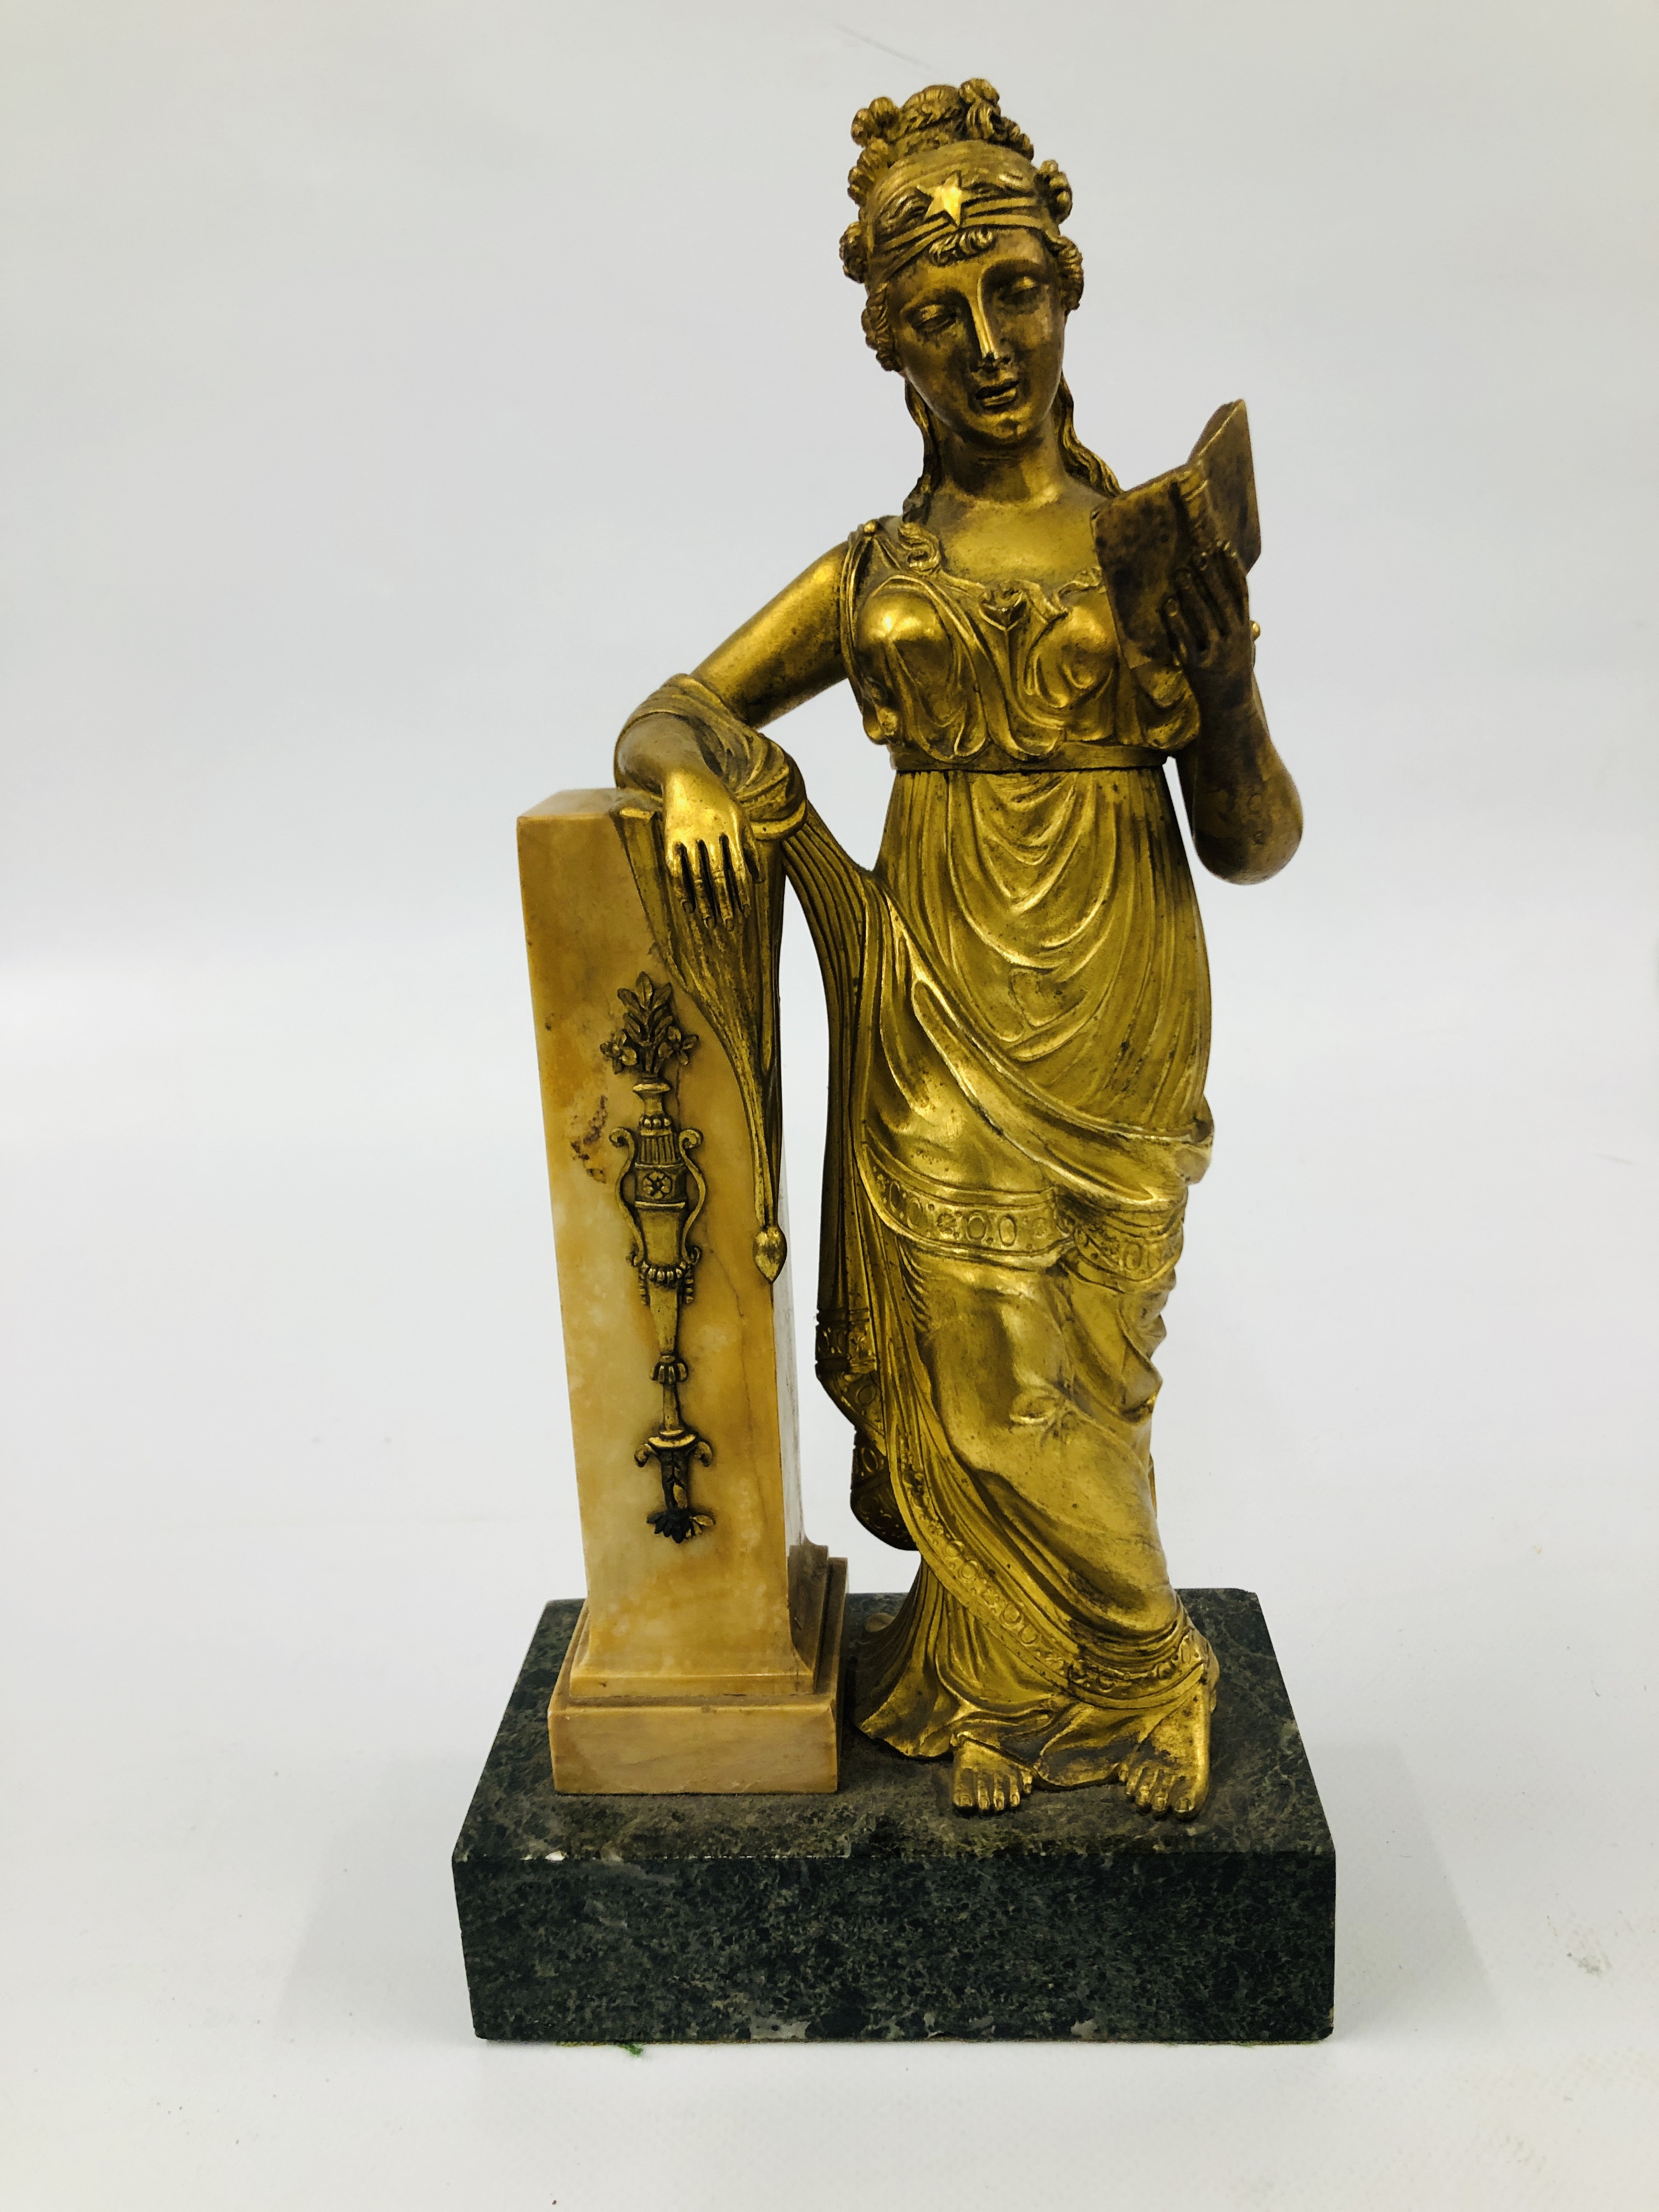 A BELLE EPOQUE GILT BRONZE FIGURE OF A STANDING WOMAN IN CLASSICAL DRESS, READING FROM A BOOK,